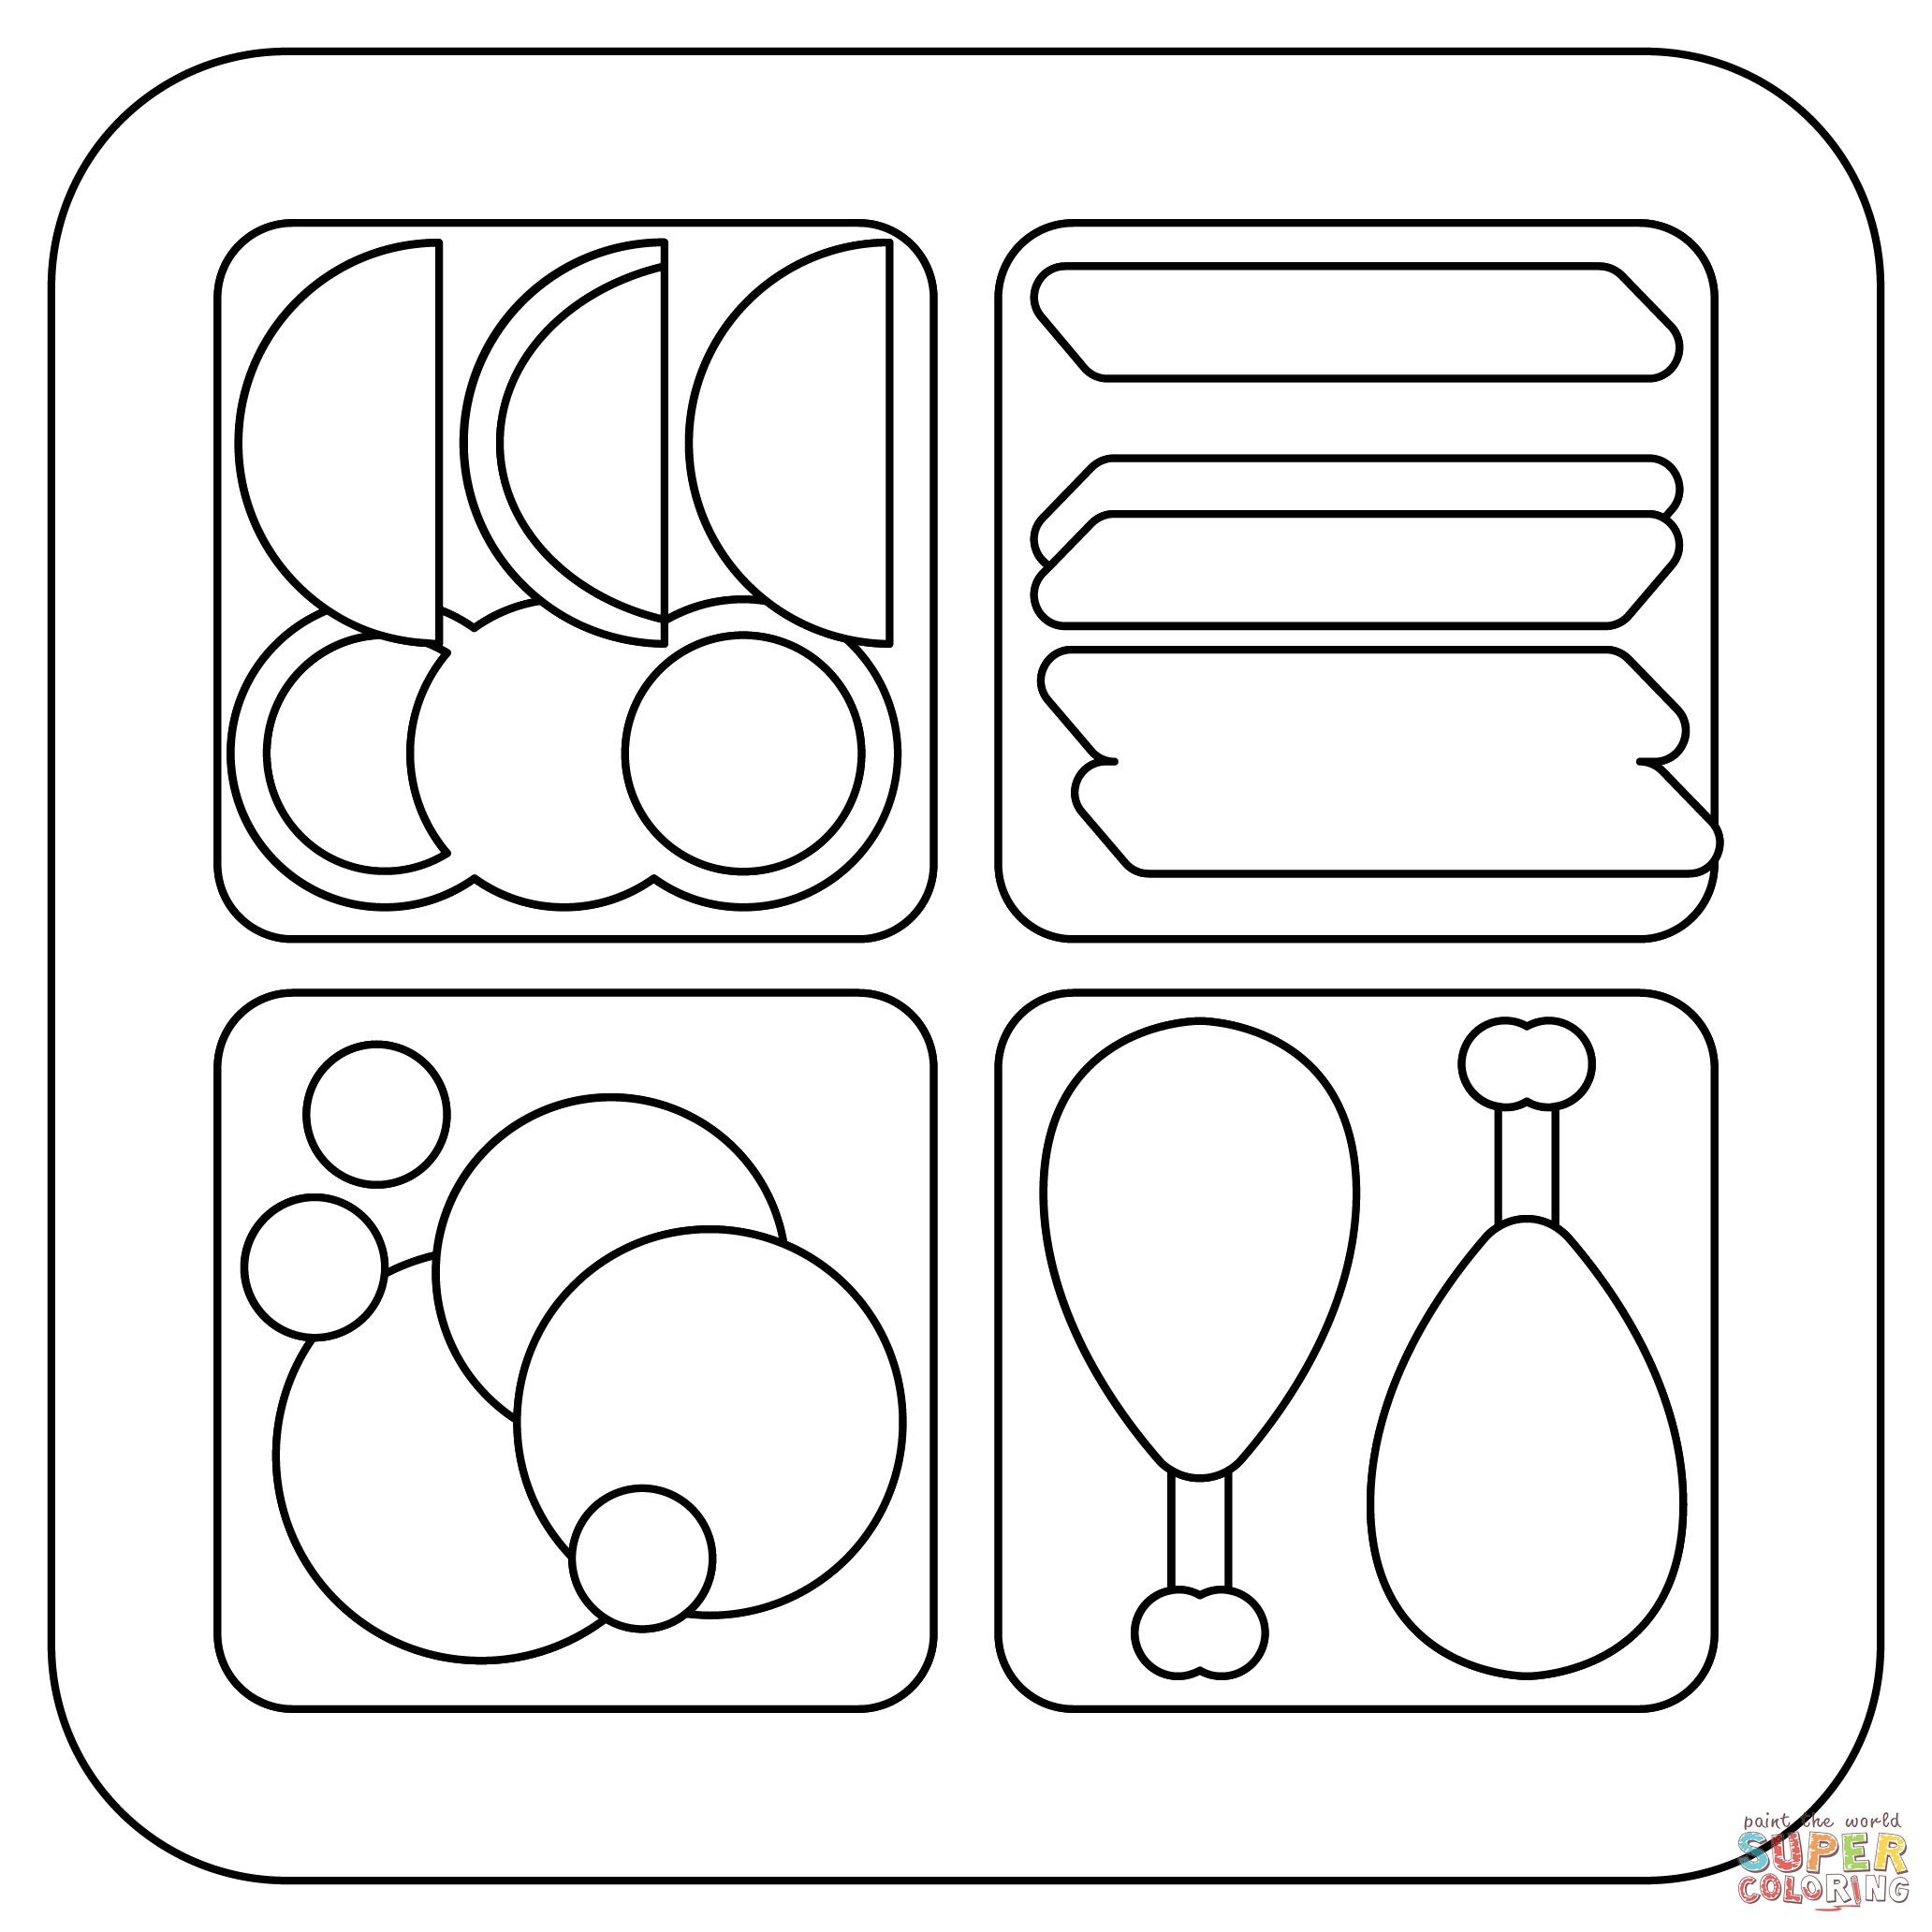 School lunch coloring page free printable coloring pages